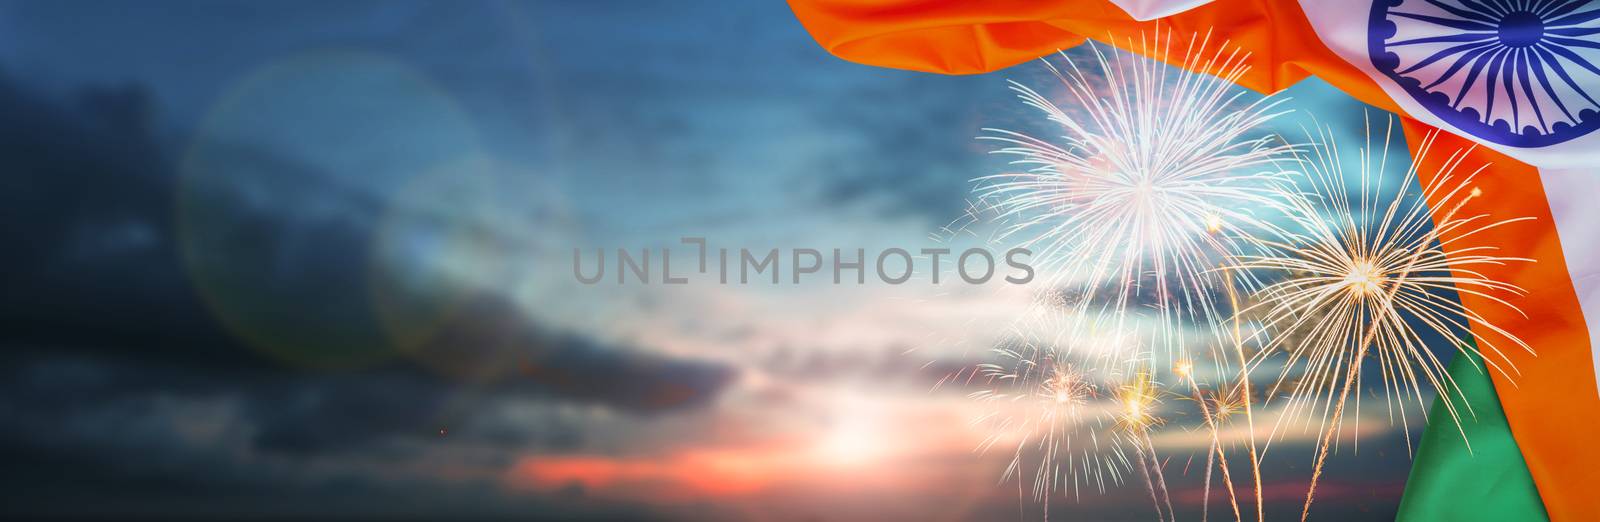 Celebration colorful firework on india flag pattern on sky background concept for indian 15 august republic independence day, symbol of nepal freedom culture and democracy in  festive celebration travel